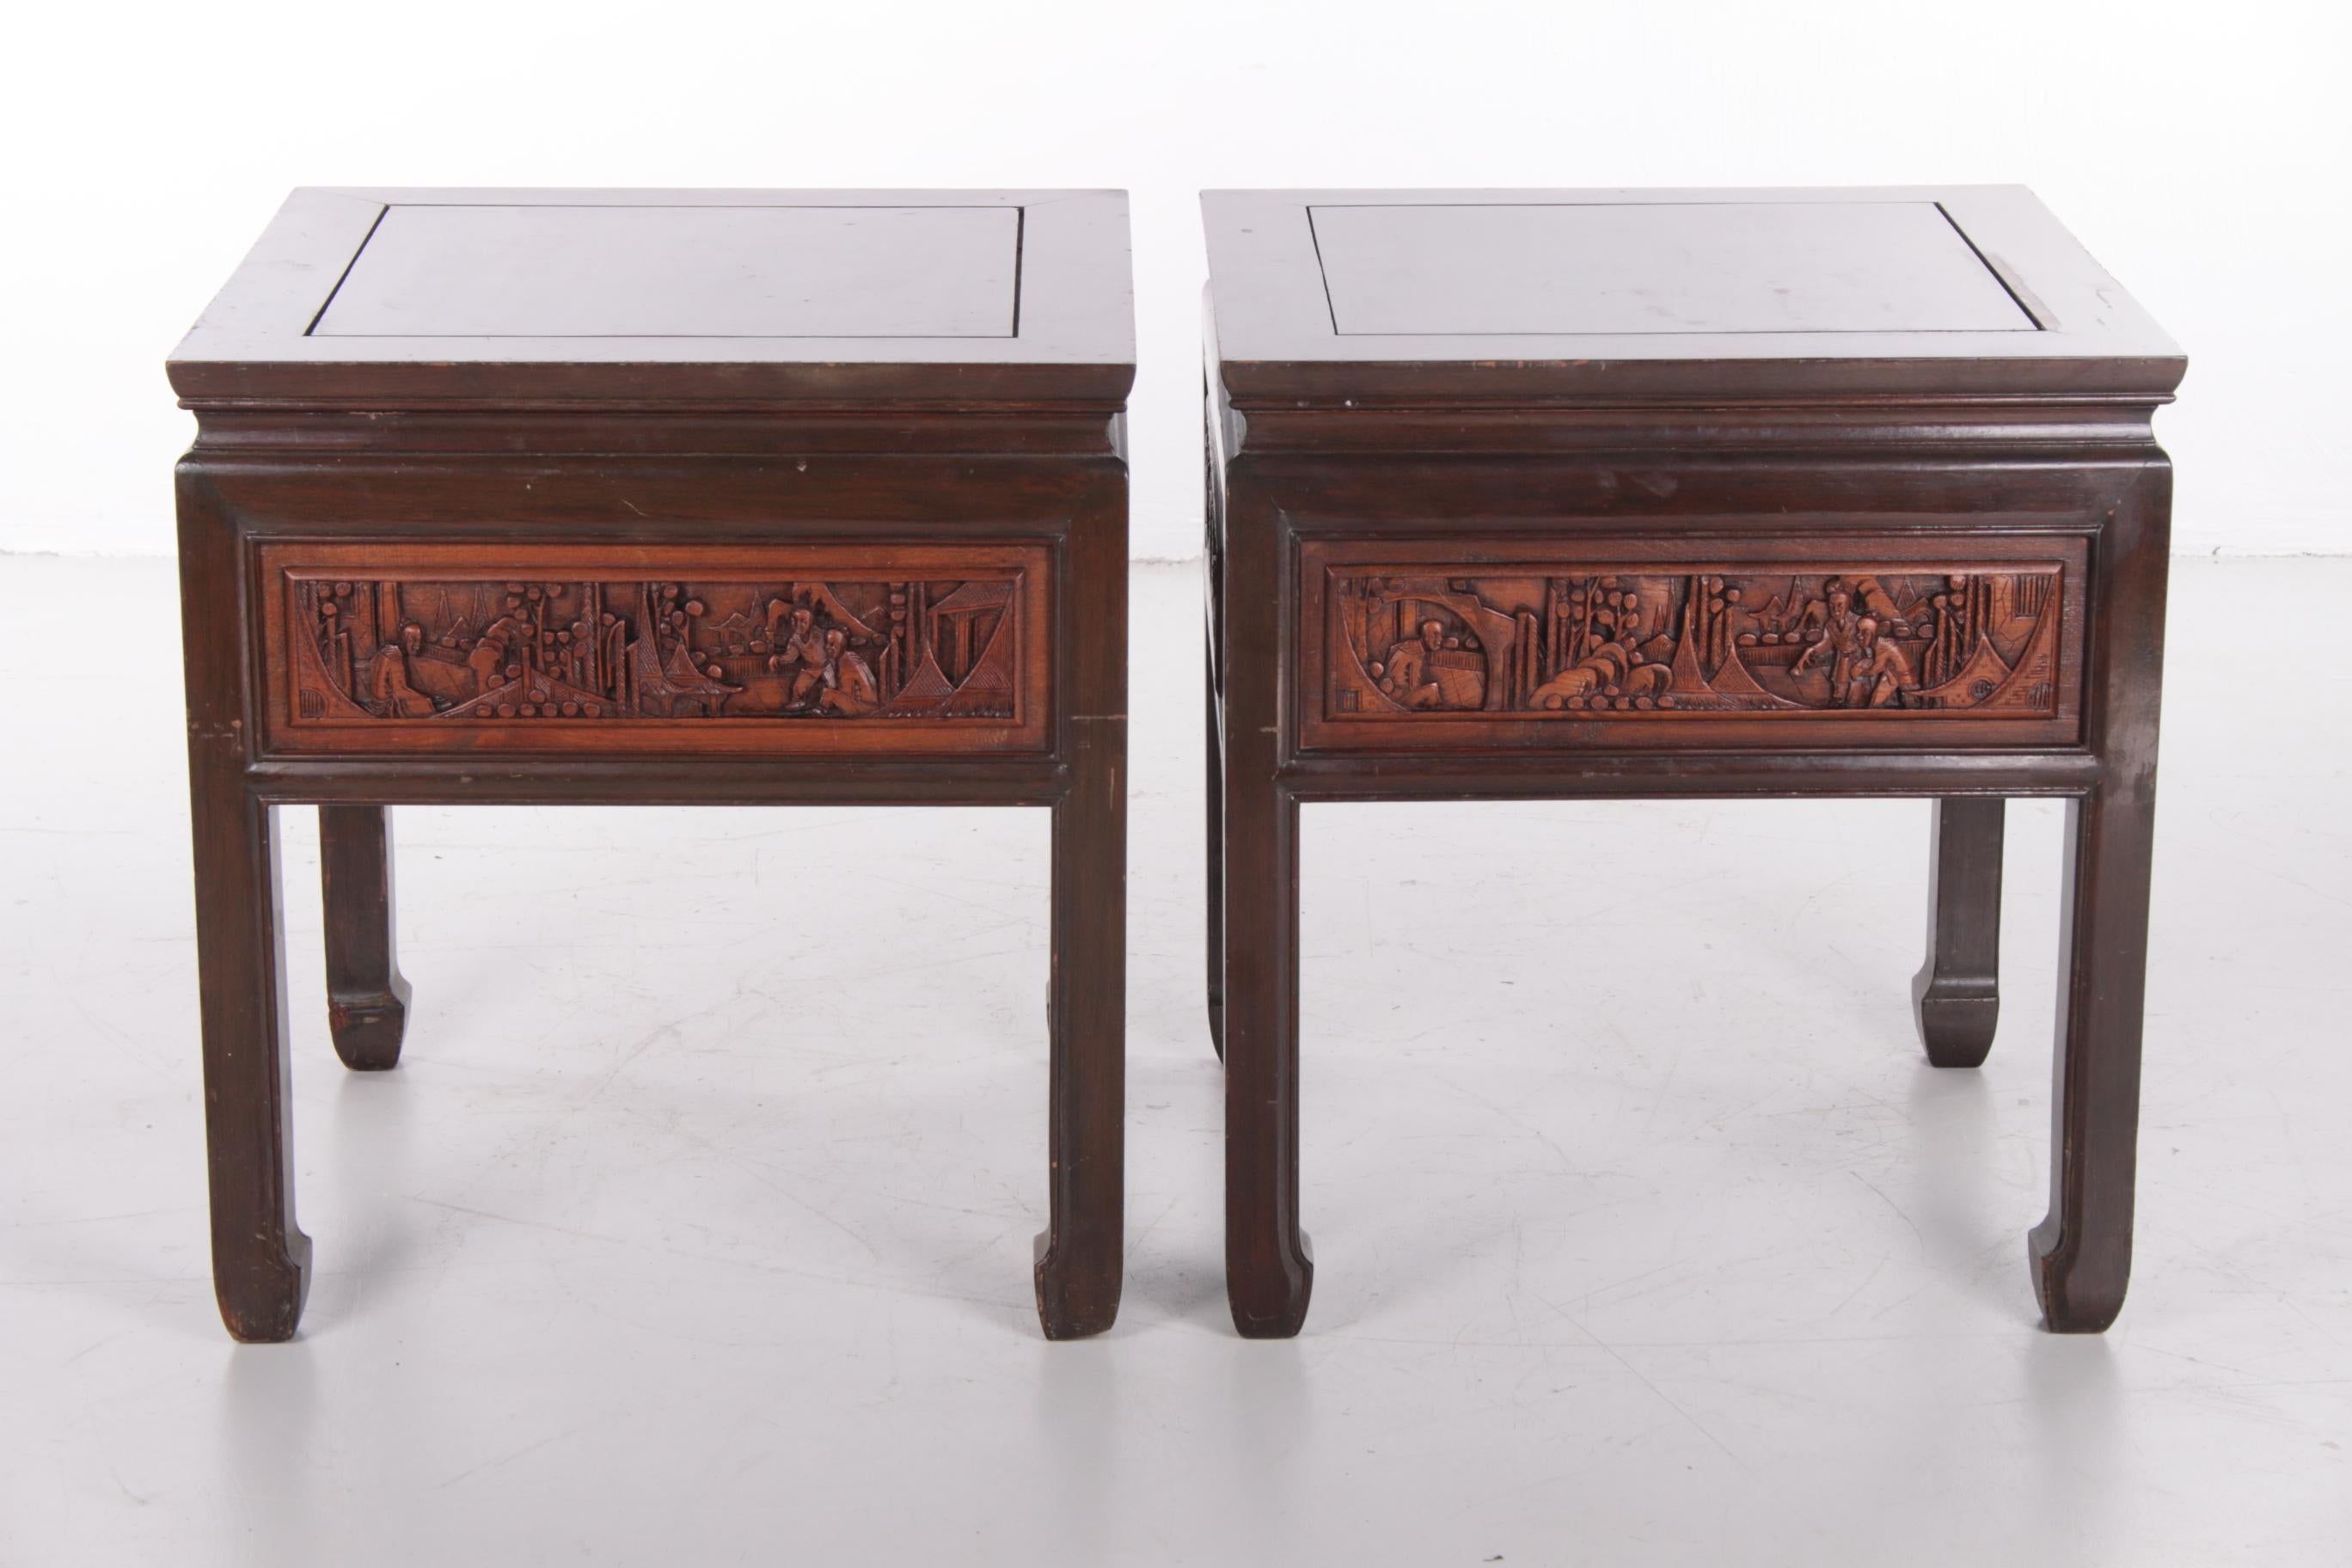 20th Century Chinese Wooden Bedside Tables with Beautiful Hand Carving 6